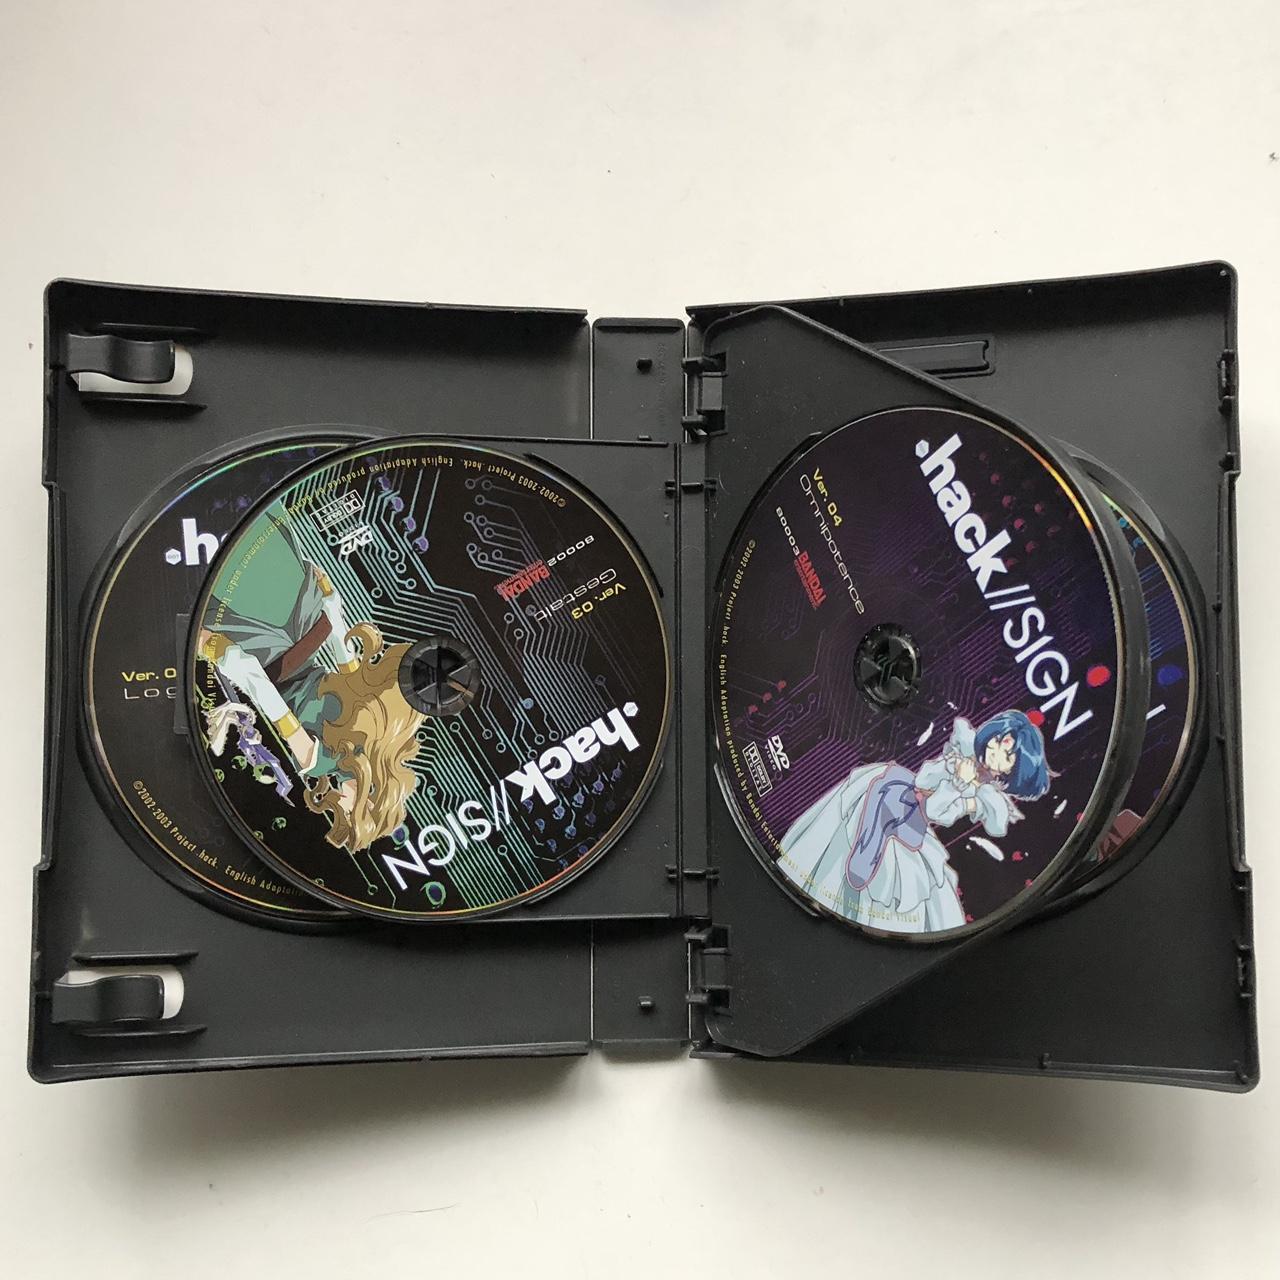 hack//Sign - The Complete Series - DVD